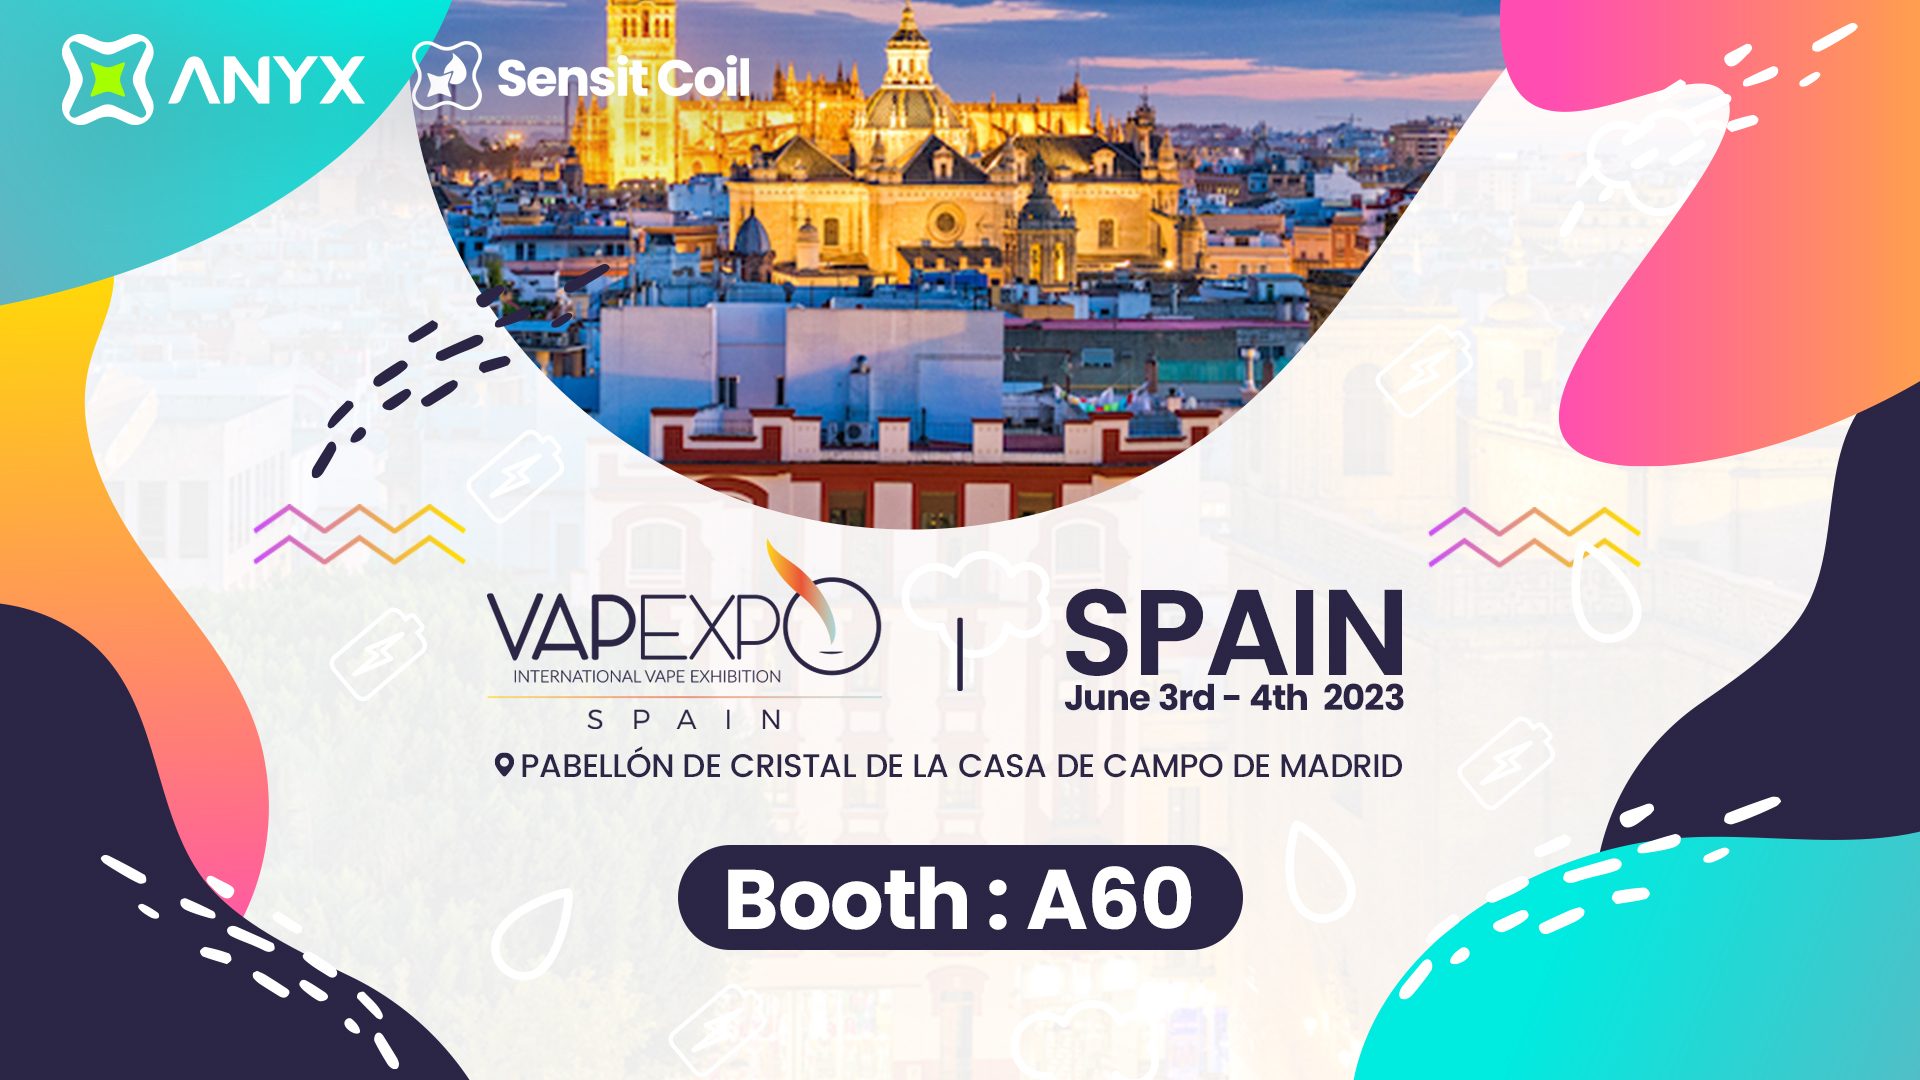 ANYX_Showcase_In_Spain_Vape_Expo_With_Sensit_Coil_Technology